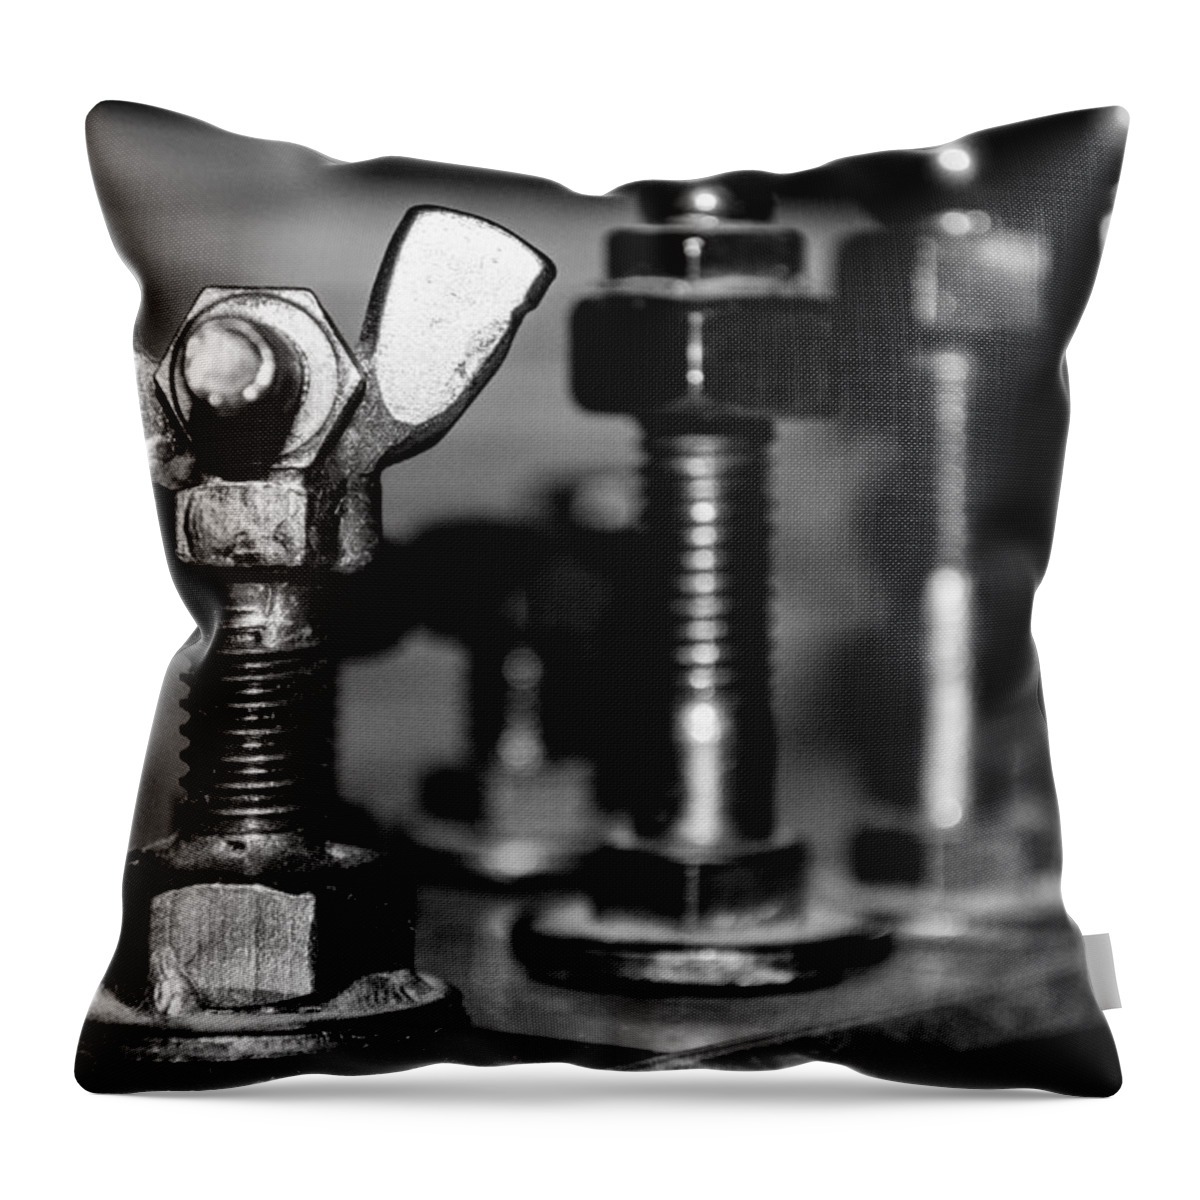 1855mm Throw Pillow featuring the photograph The Strategic Wing Nut by Alan Marlowe